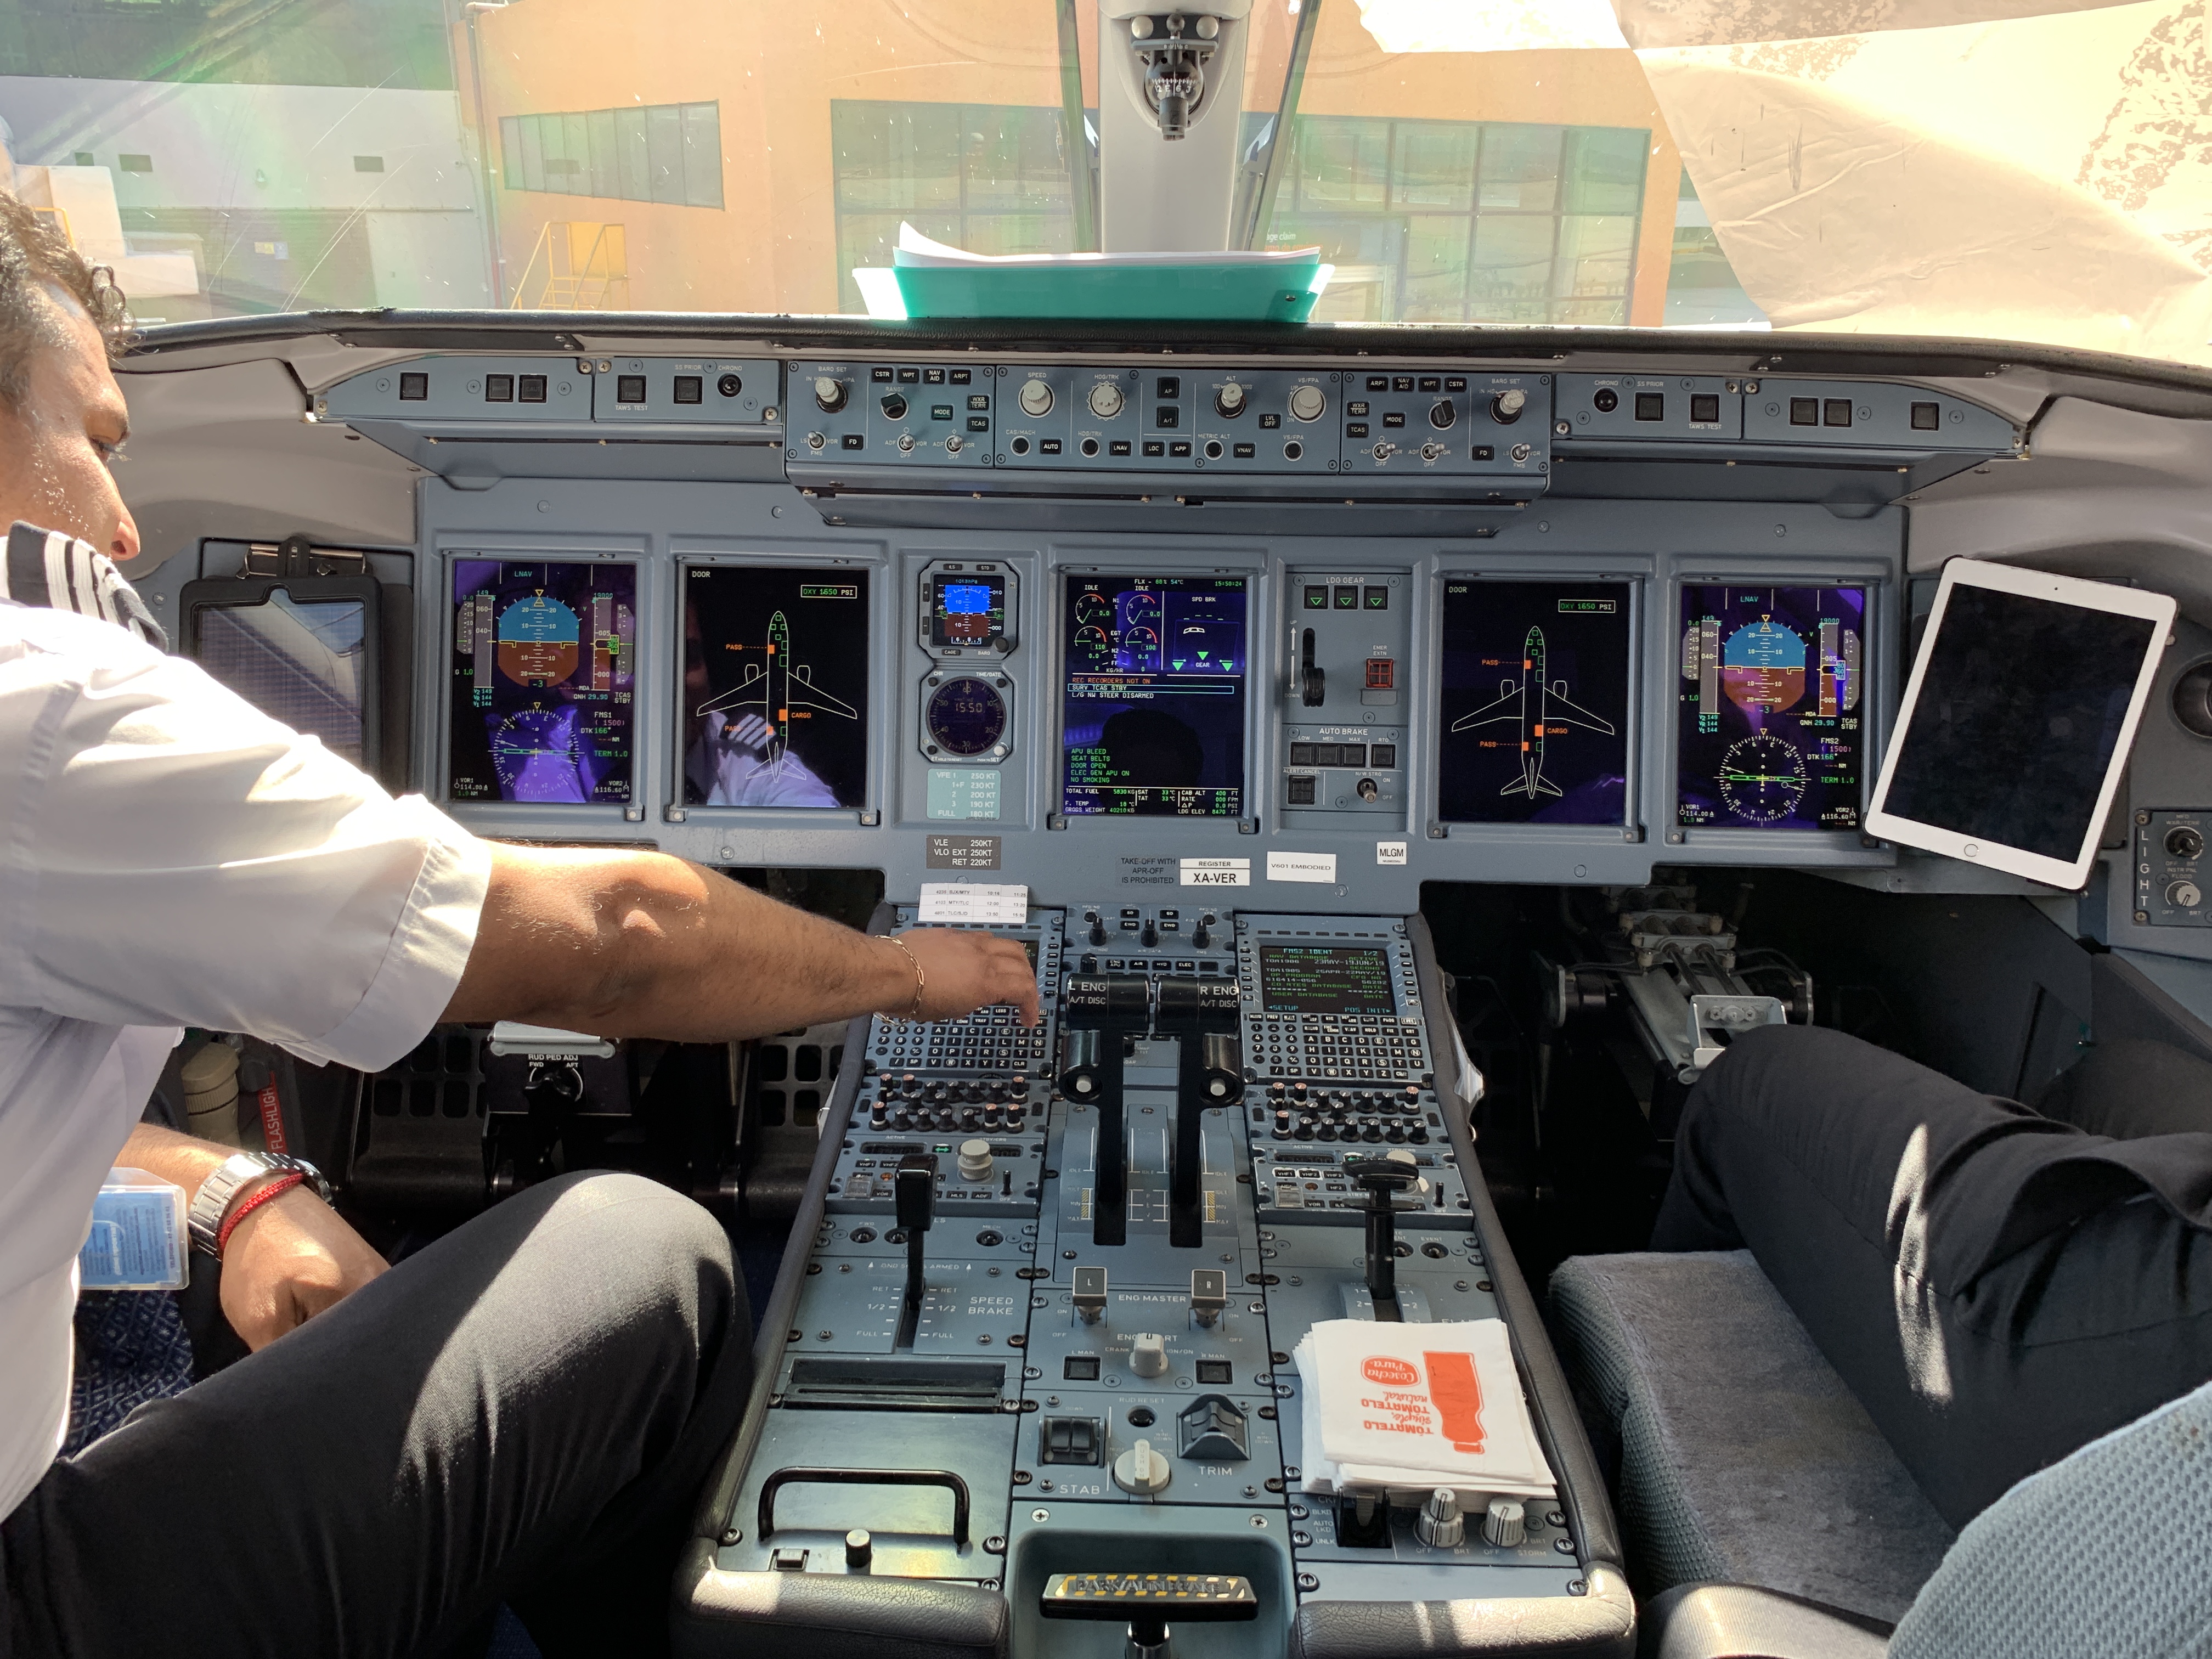 a man in a white shirt and black pants sitting in a cockpit of an airplane